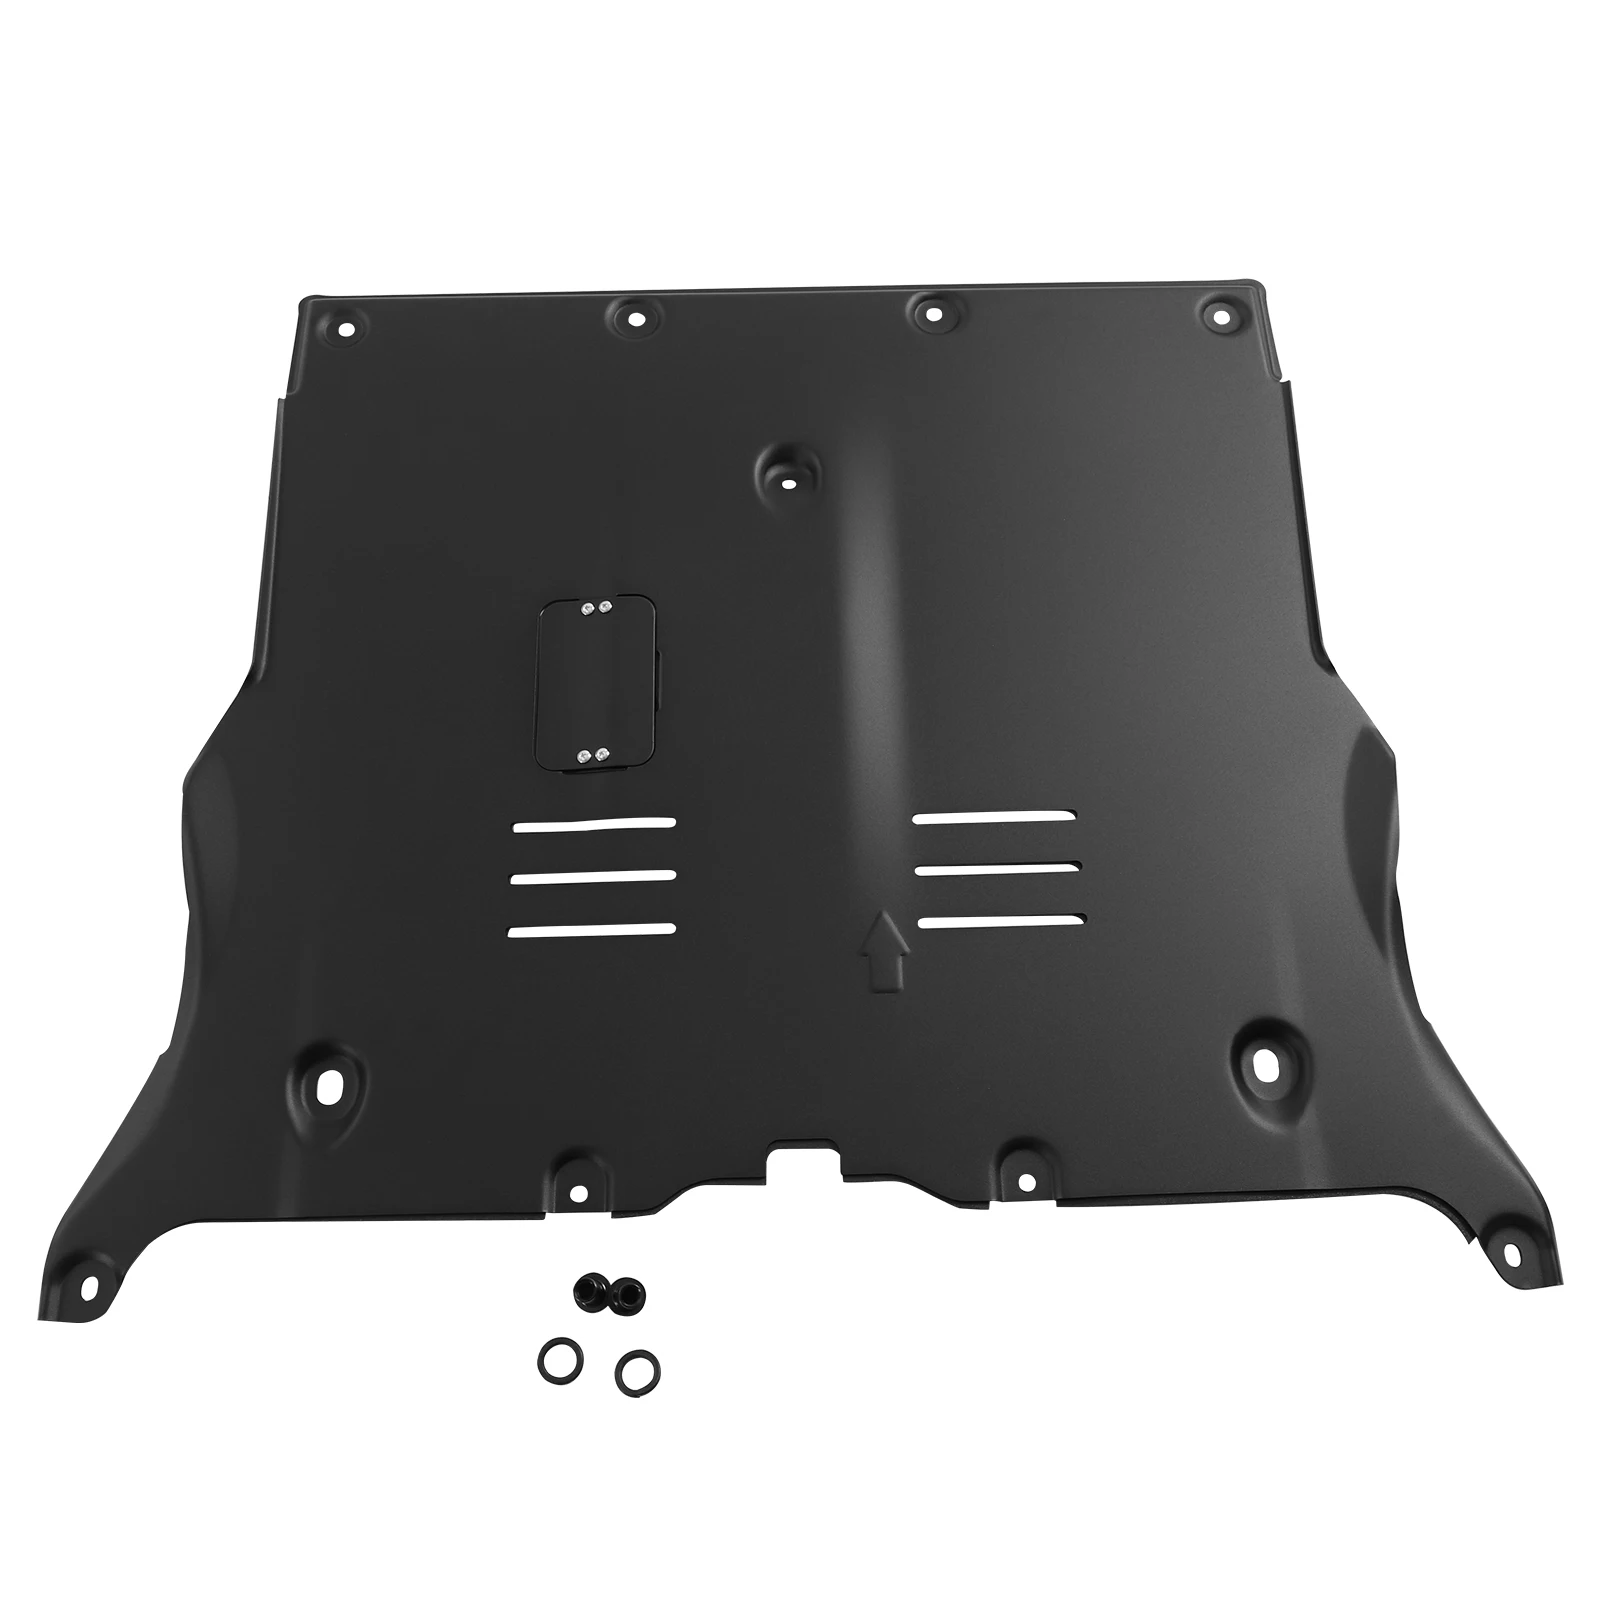 Front Skid Plate For Model Y Under Engine Guard Cover & Tesla Model 3 2018-2022 newly painted internal combustion engine model toy 1 87 ho qinling 160 rail car train model toy